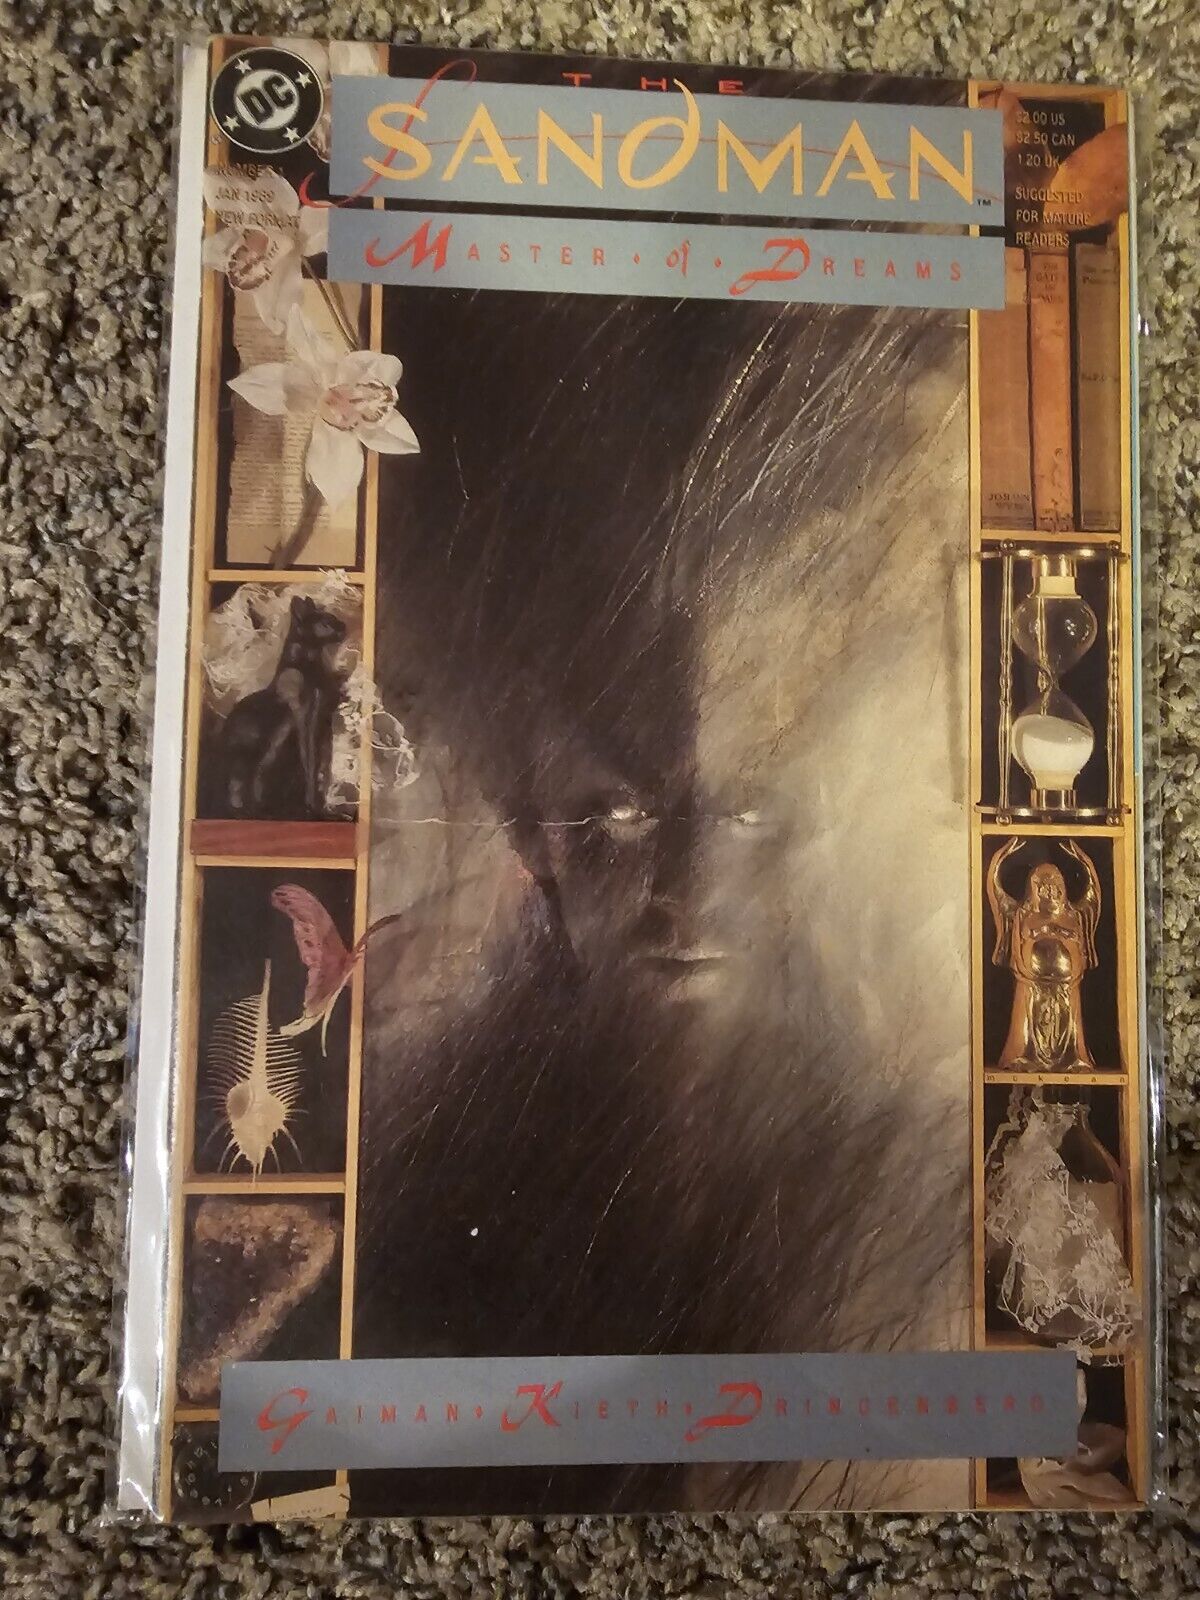 The Sandman #1 1989 NM WHITE PAGES